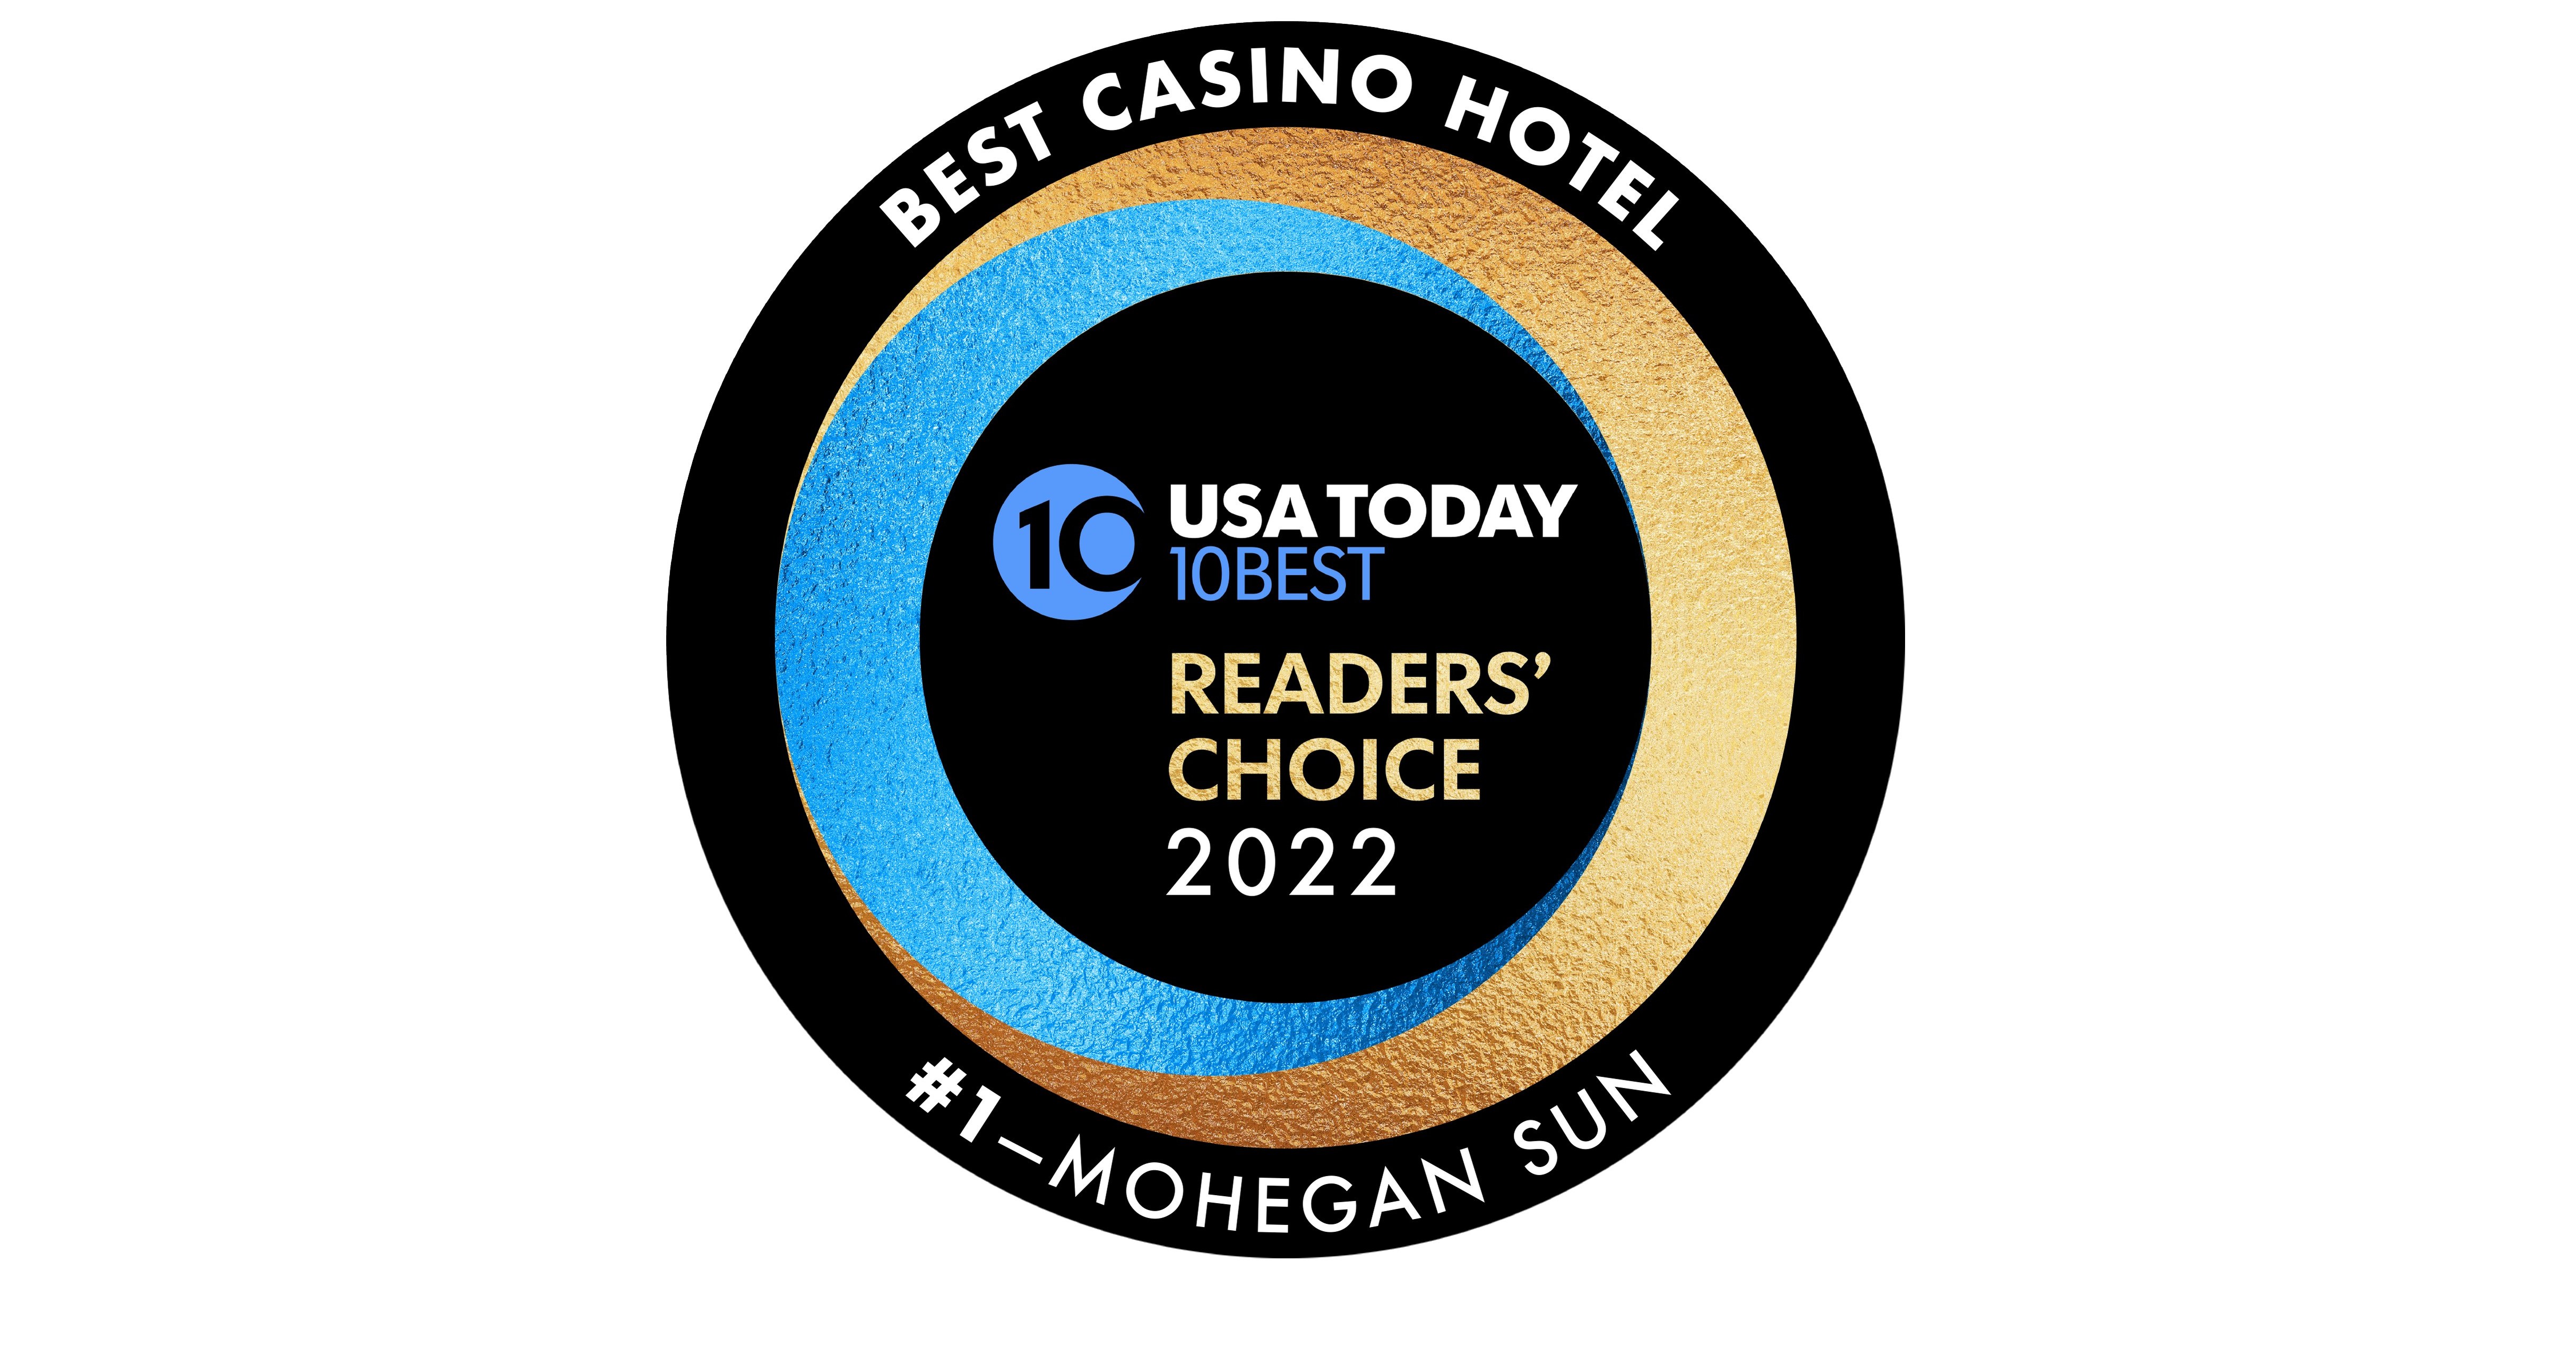 Mohegan Sun Voted 1 "Best Casino Hotel" For Fifth Consecutive Year by